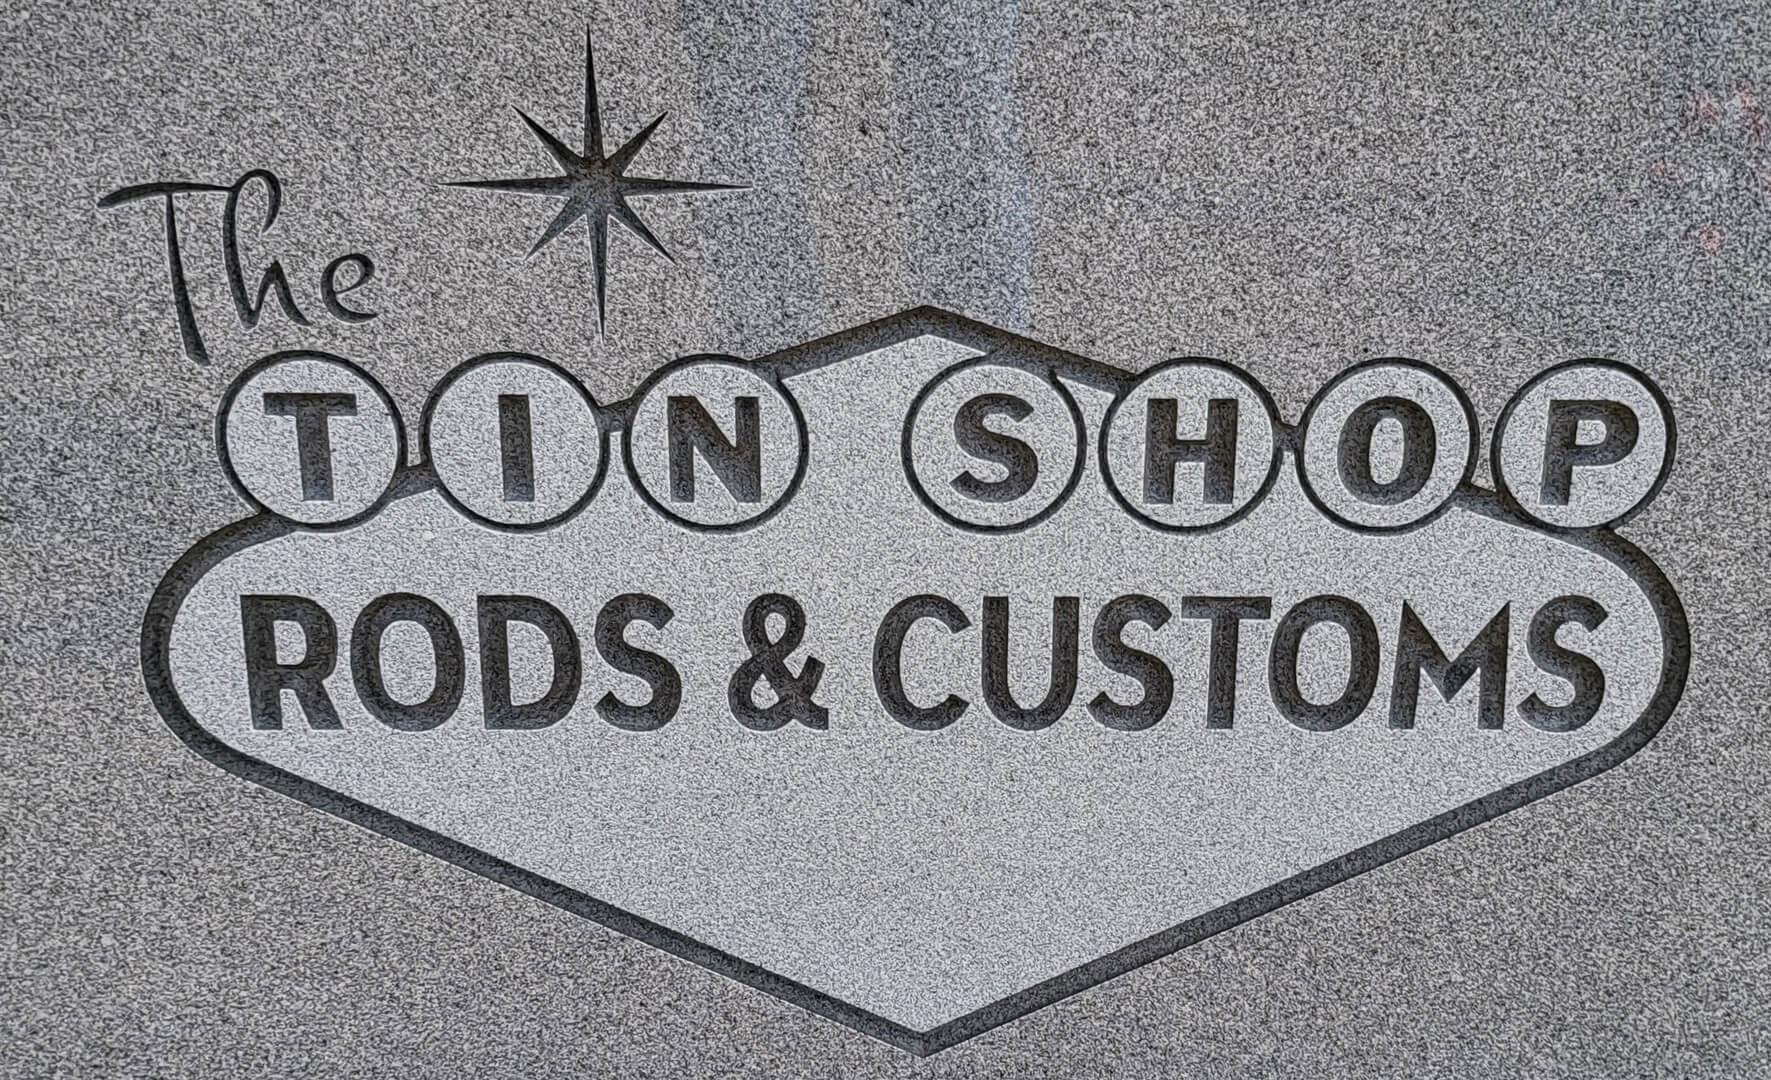 A signboard that says The Tin Shop Rods and Customs